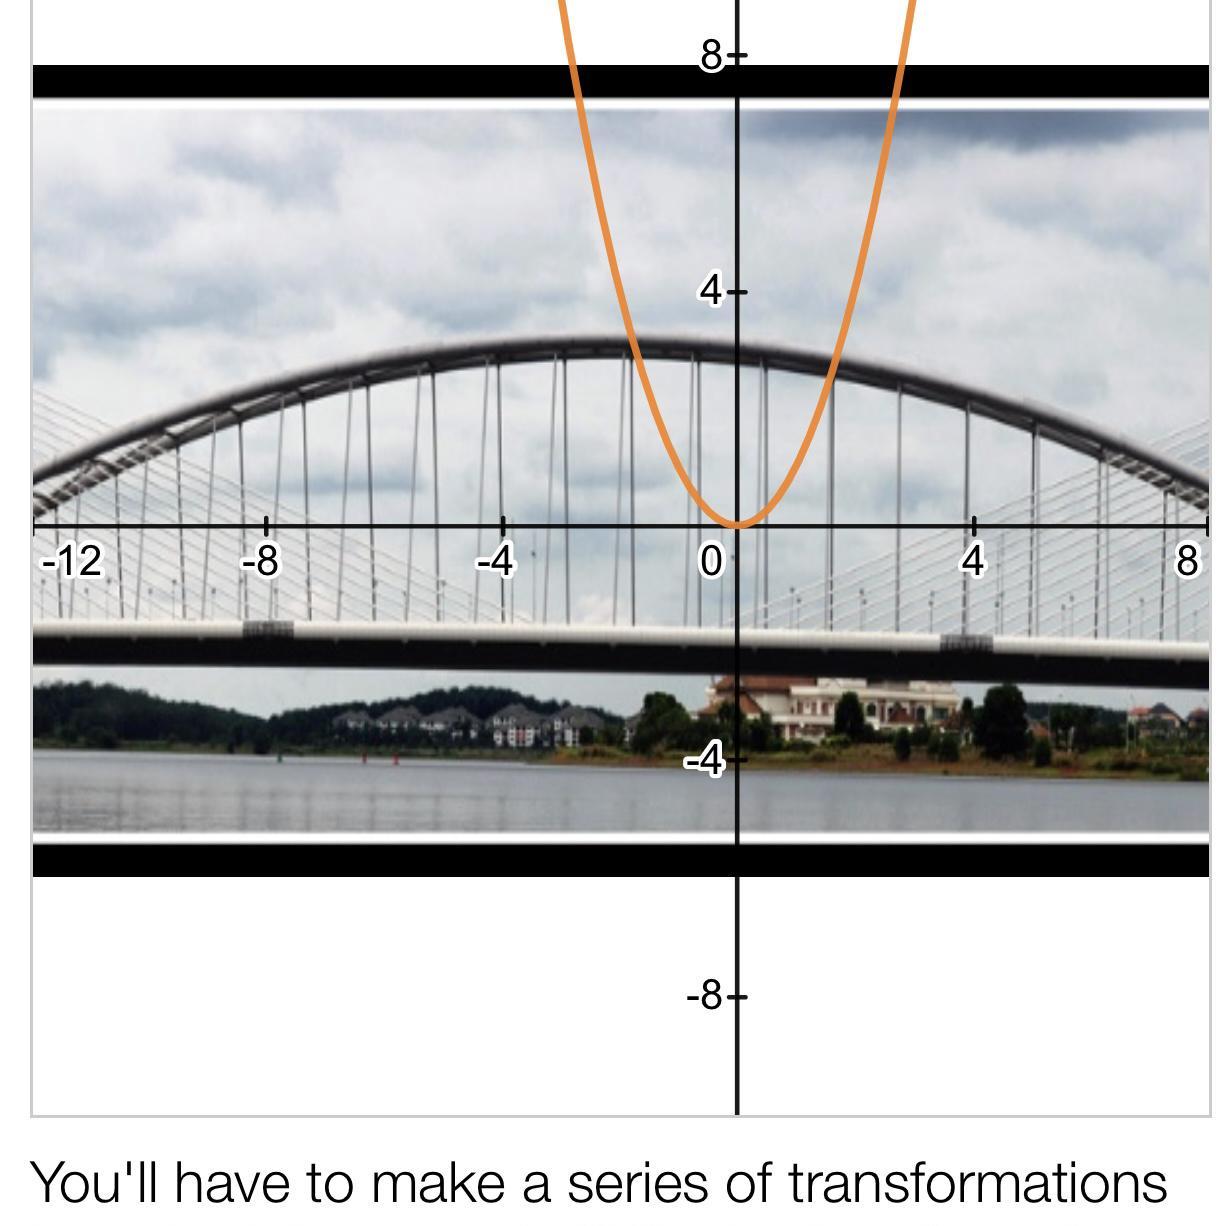 You'll Have To Make A Series Of Transformations To Make This Parabola Fit The Bridge. Describethem